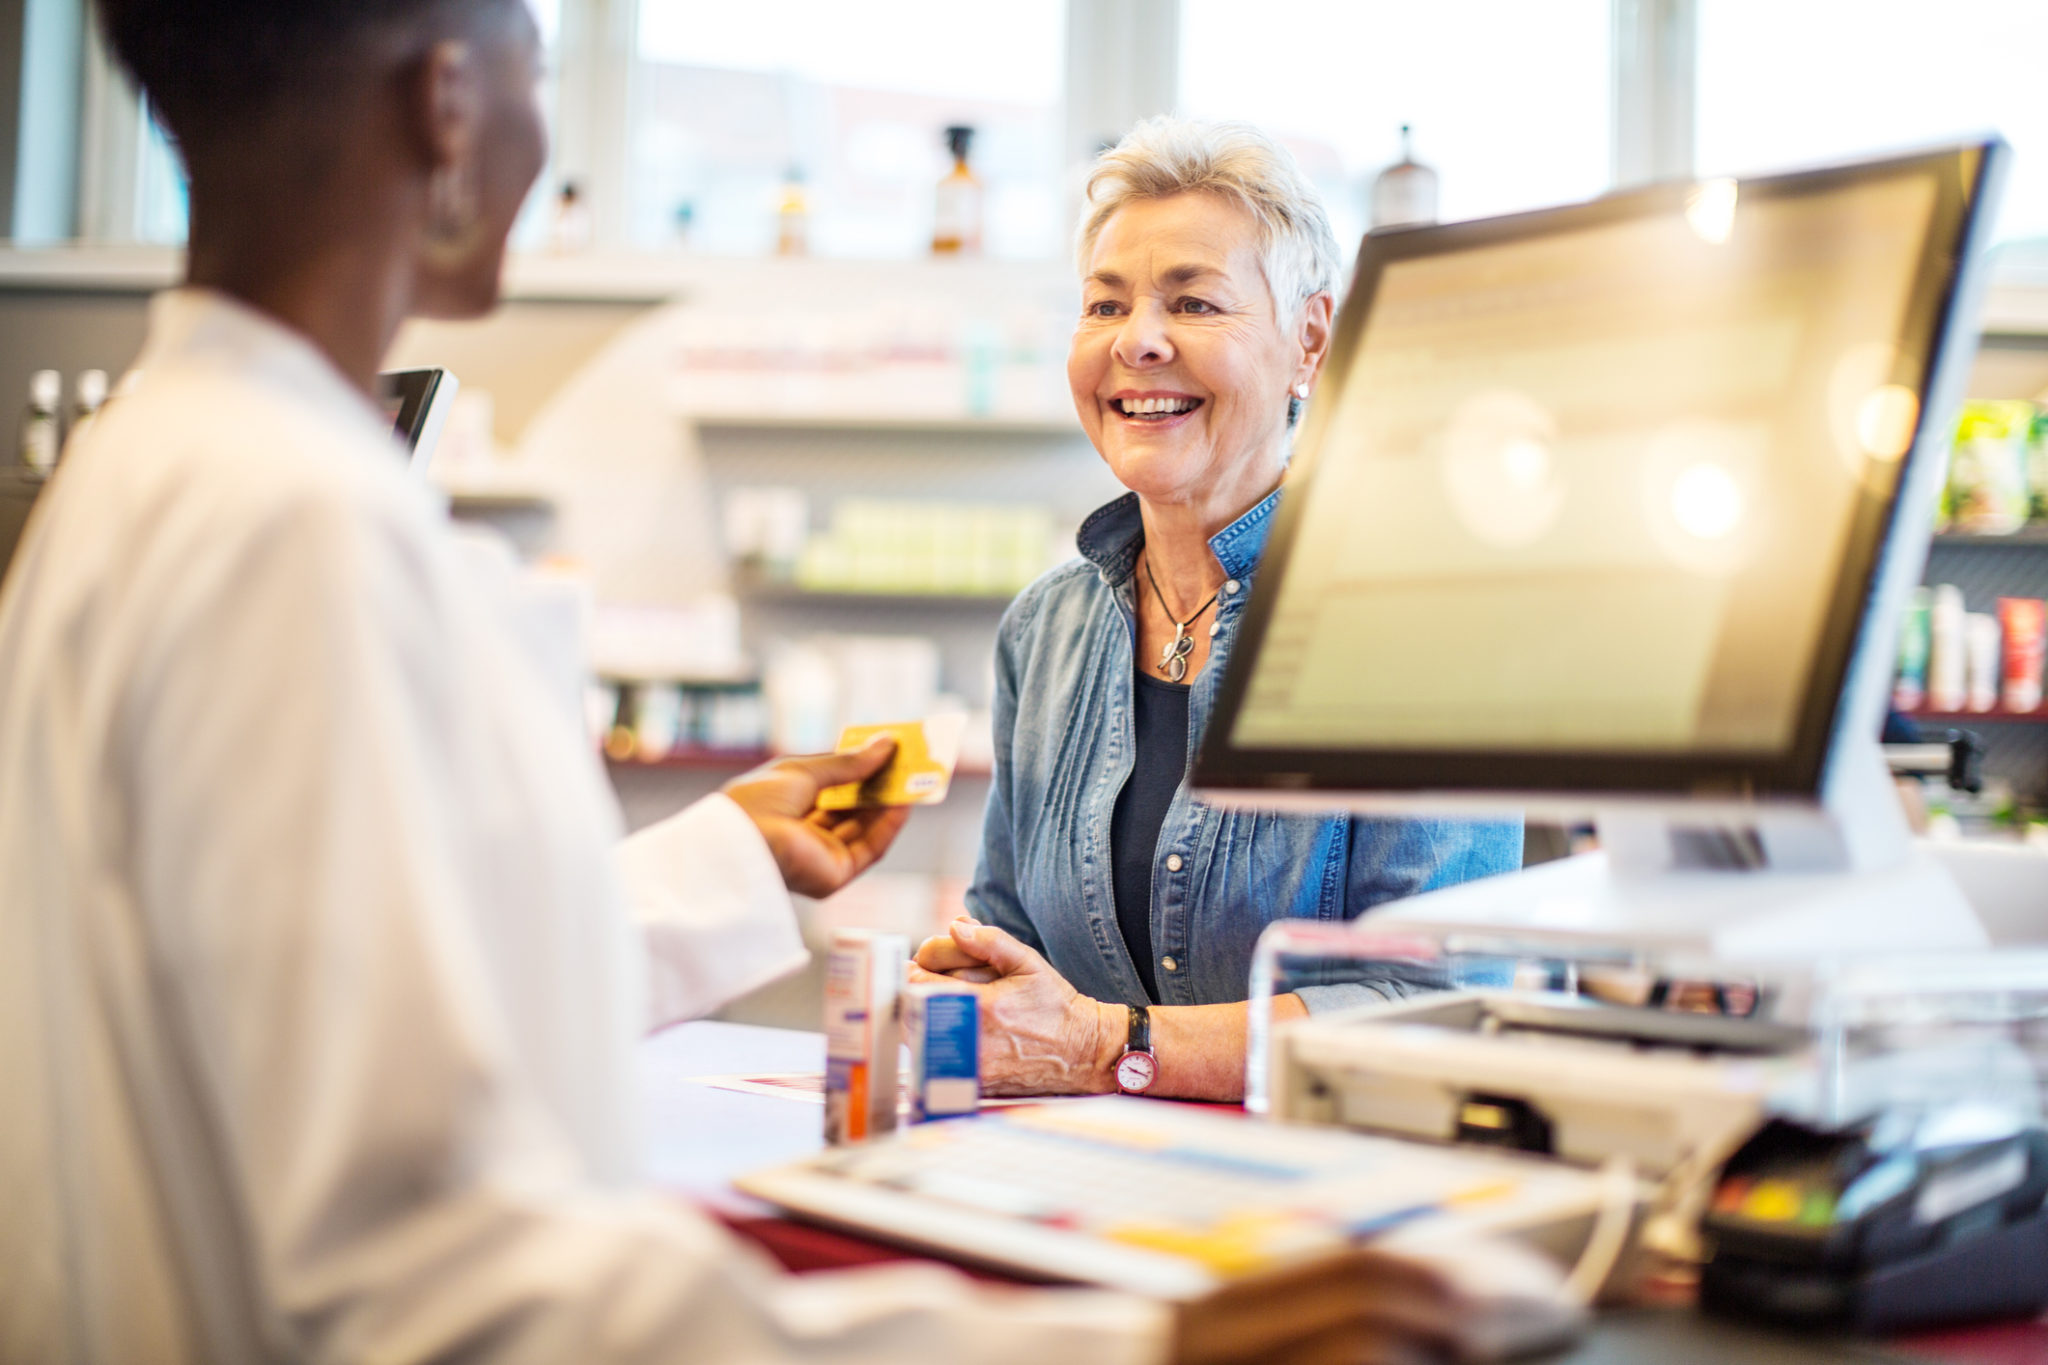 How do community pharmacies benefit from using a shared care record?